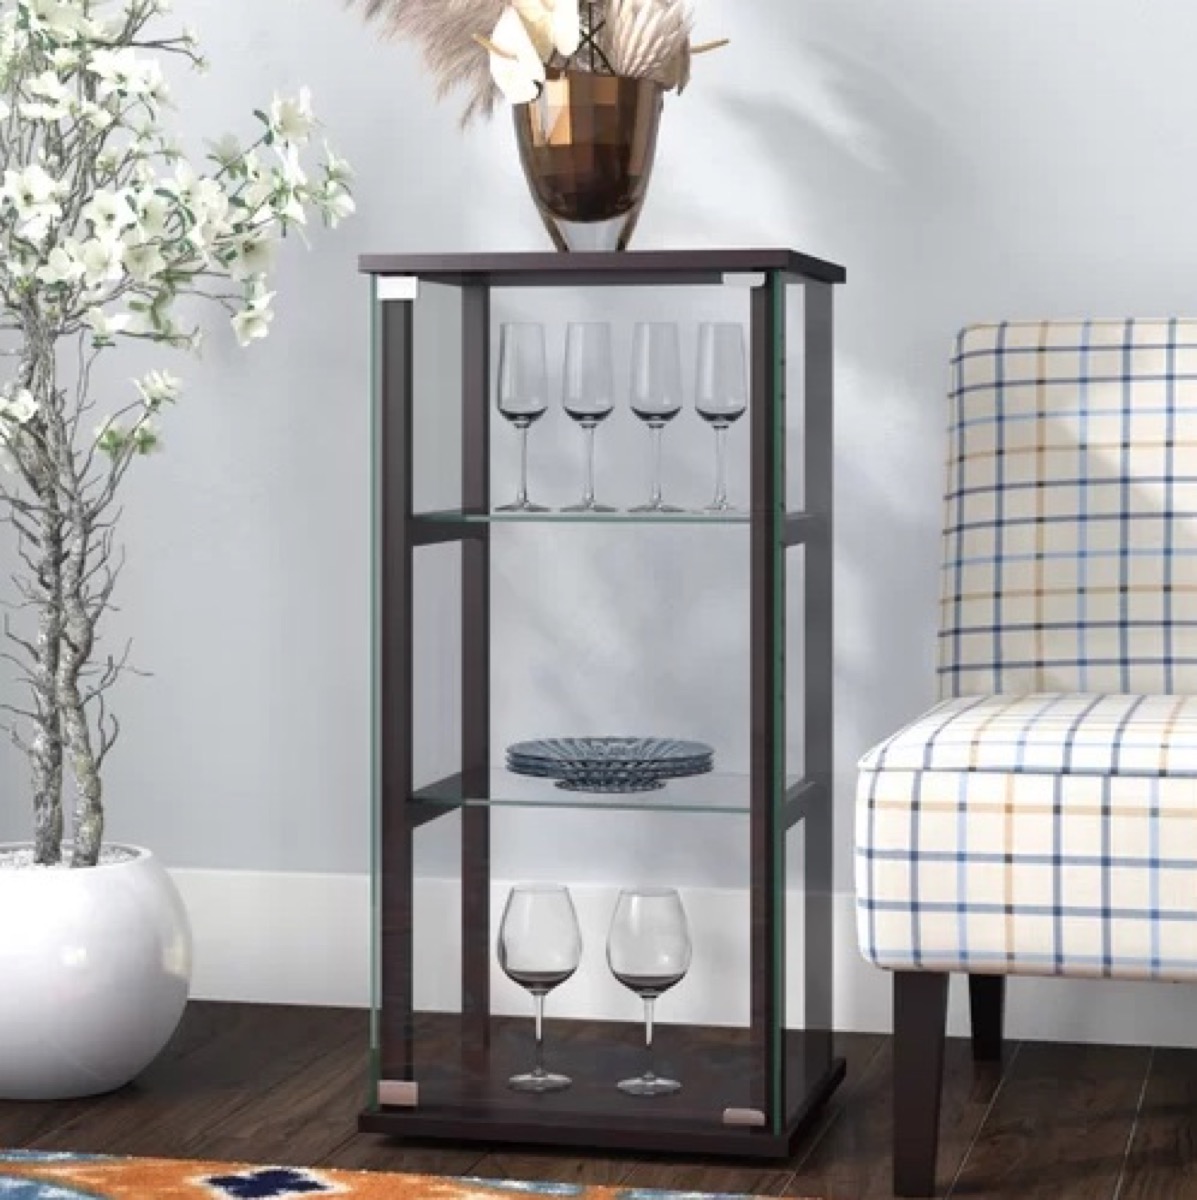 A Display Cabinet From Wayfair {Save Money on Furniture}